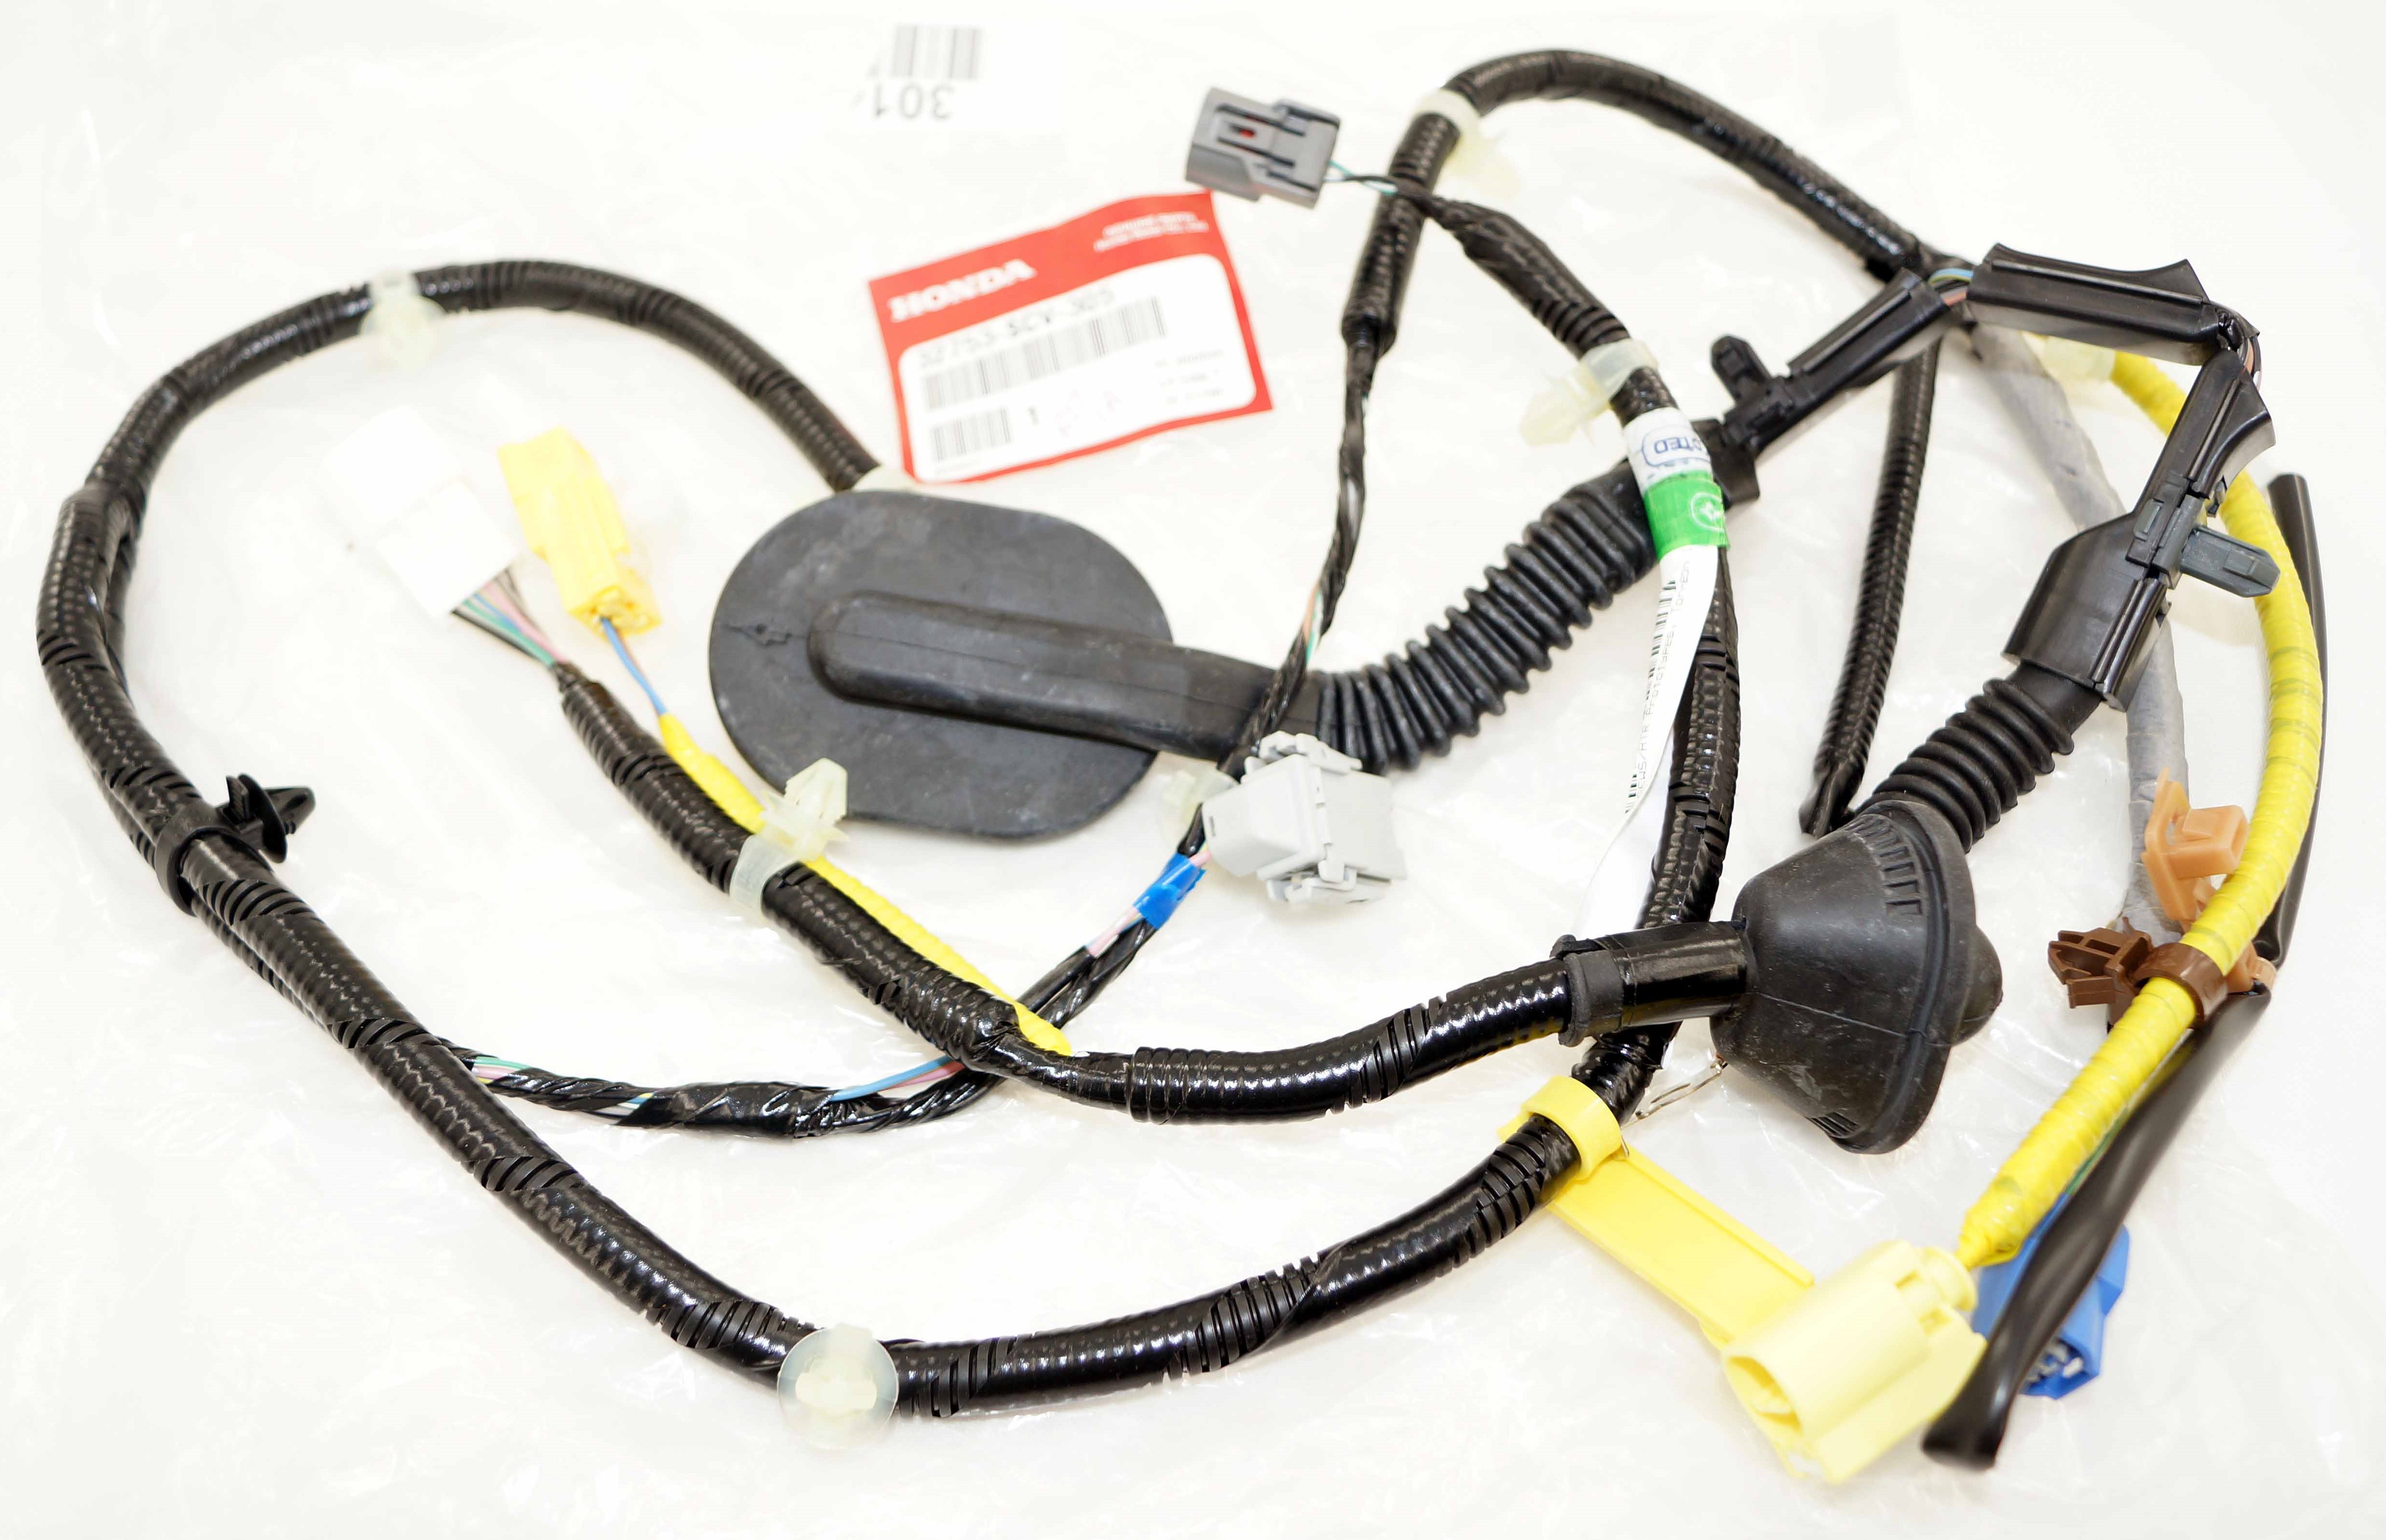 Genuine OEM 32753-SCV-305 Honda Rear Right Door Wire Harness for Element - image 3